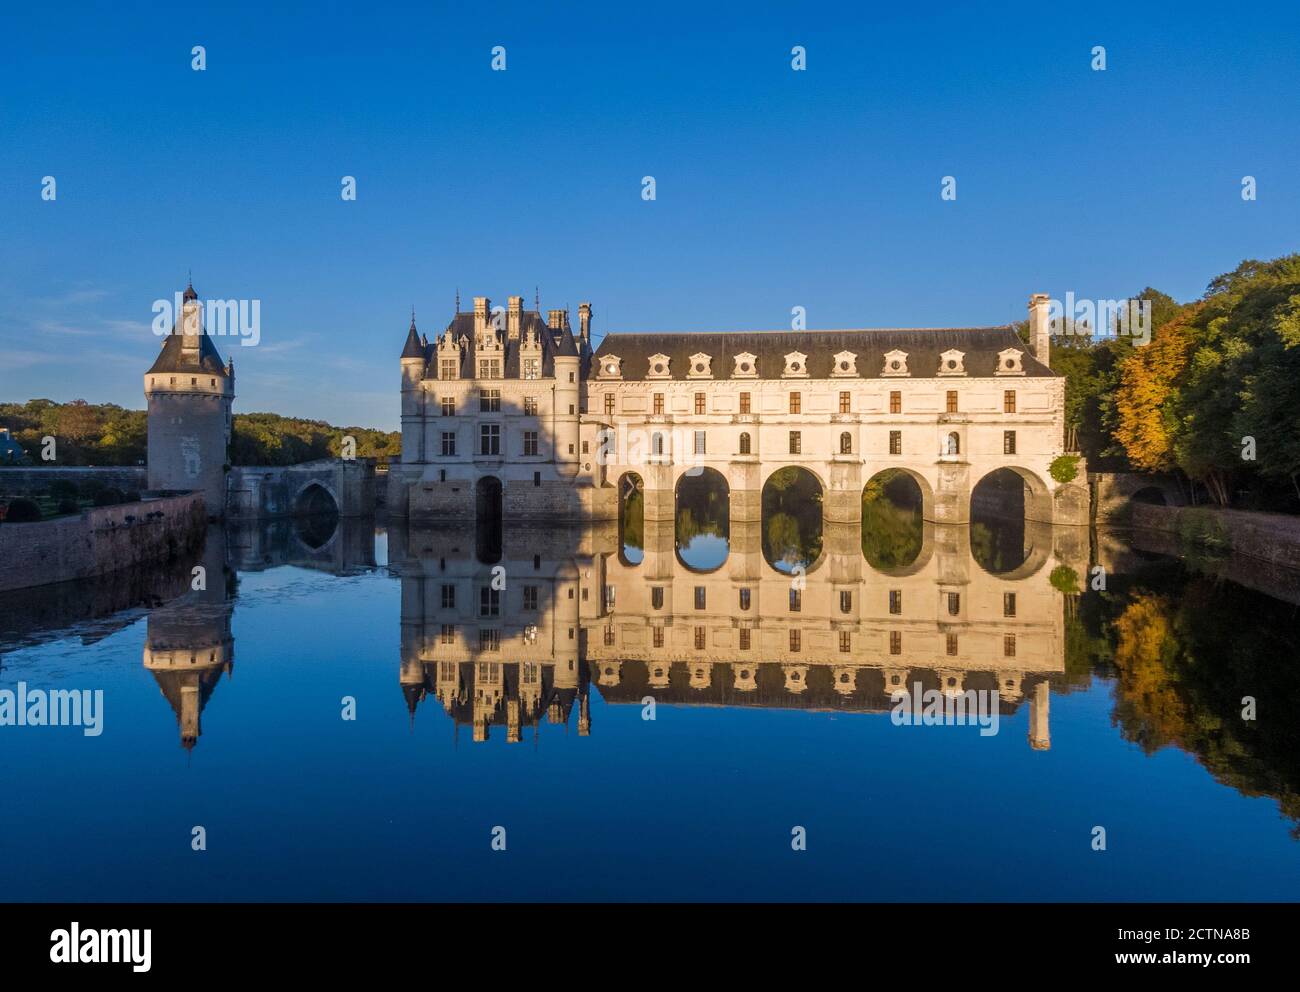 Sunset view of Chenonceaux romantic castle, one of the best-known chateaux of the Loire valley, France Stock Photo